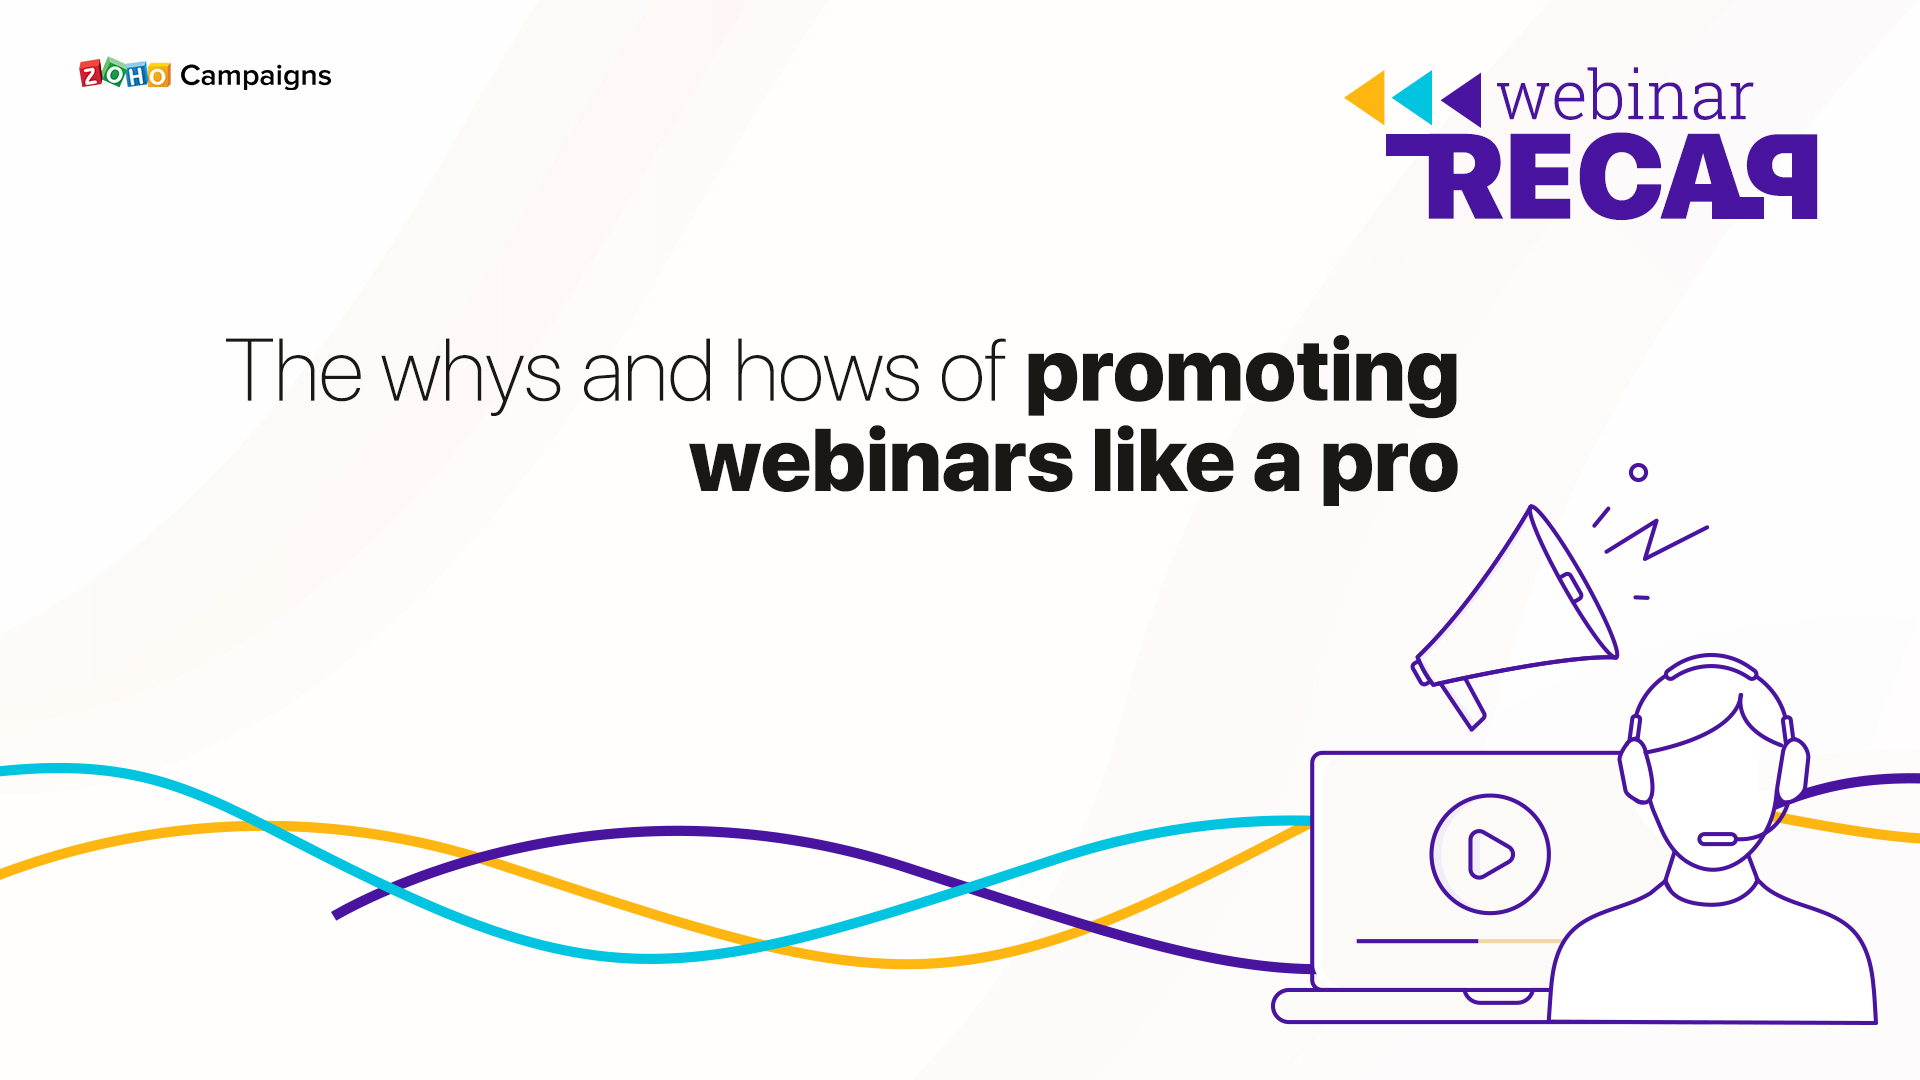 Webinar Recap: The whys and hows of promoting webinars like a pro